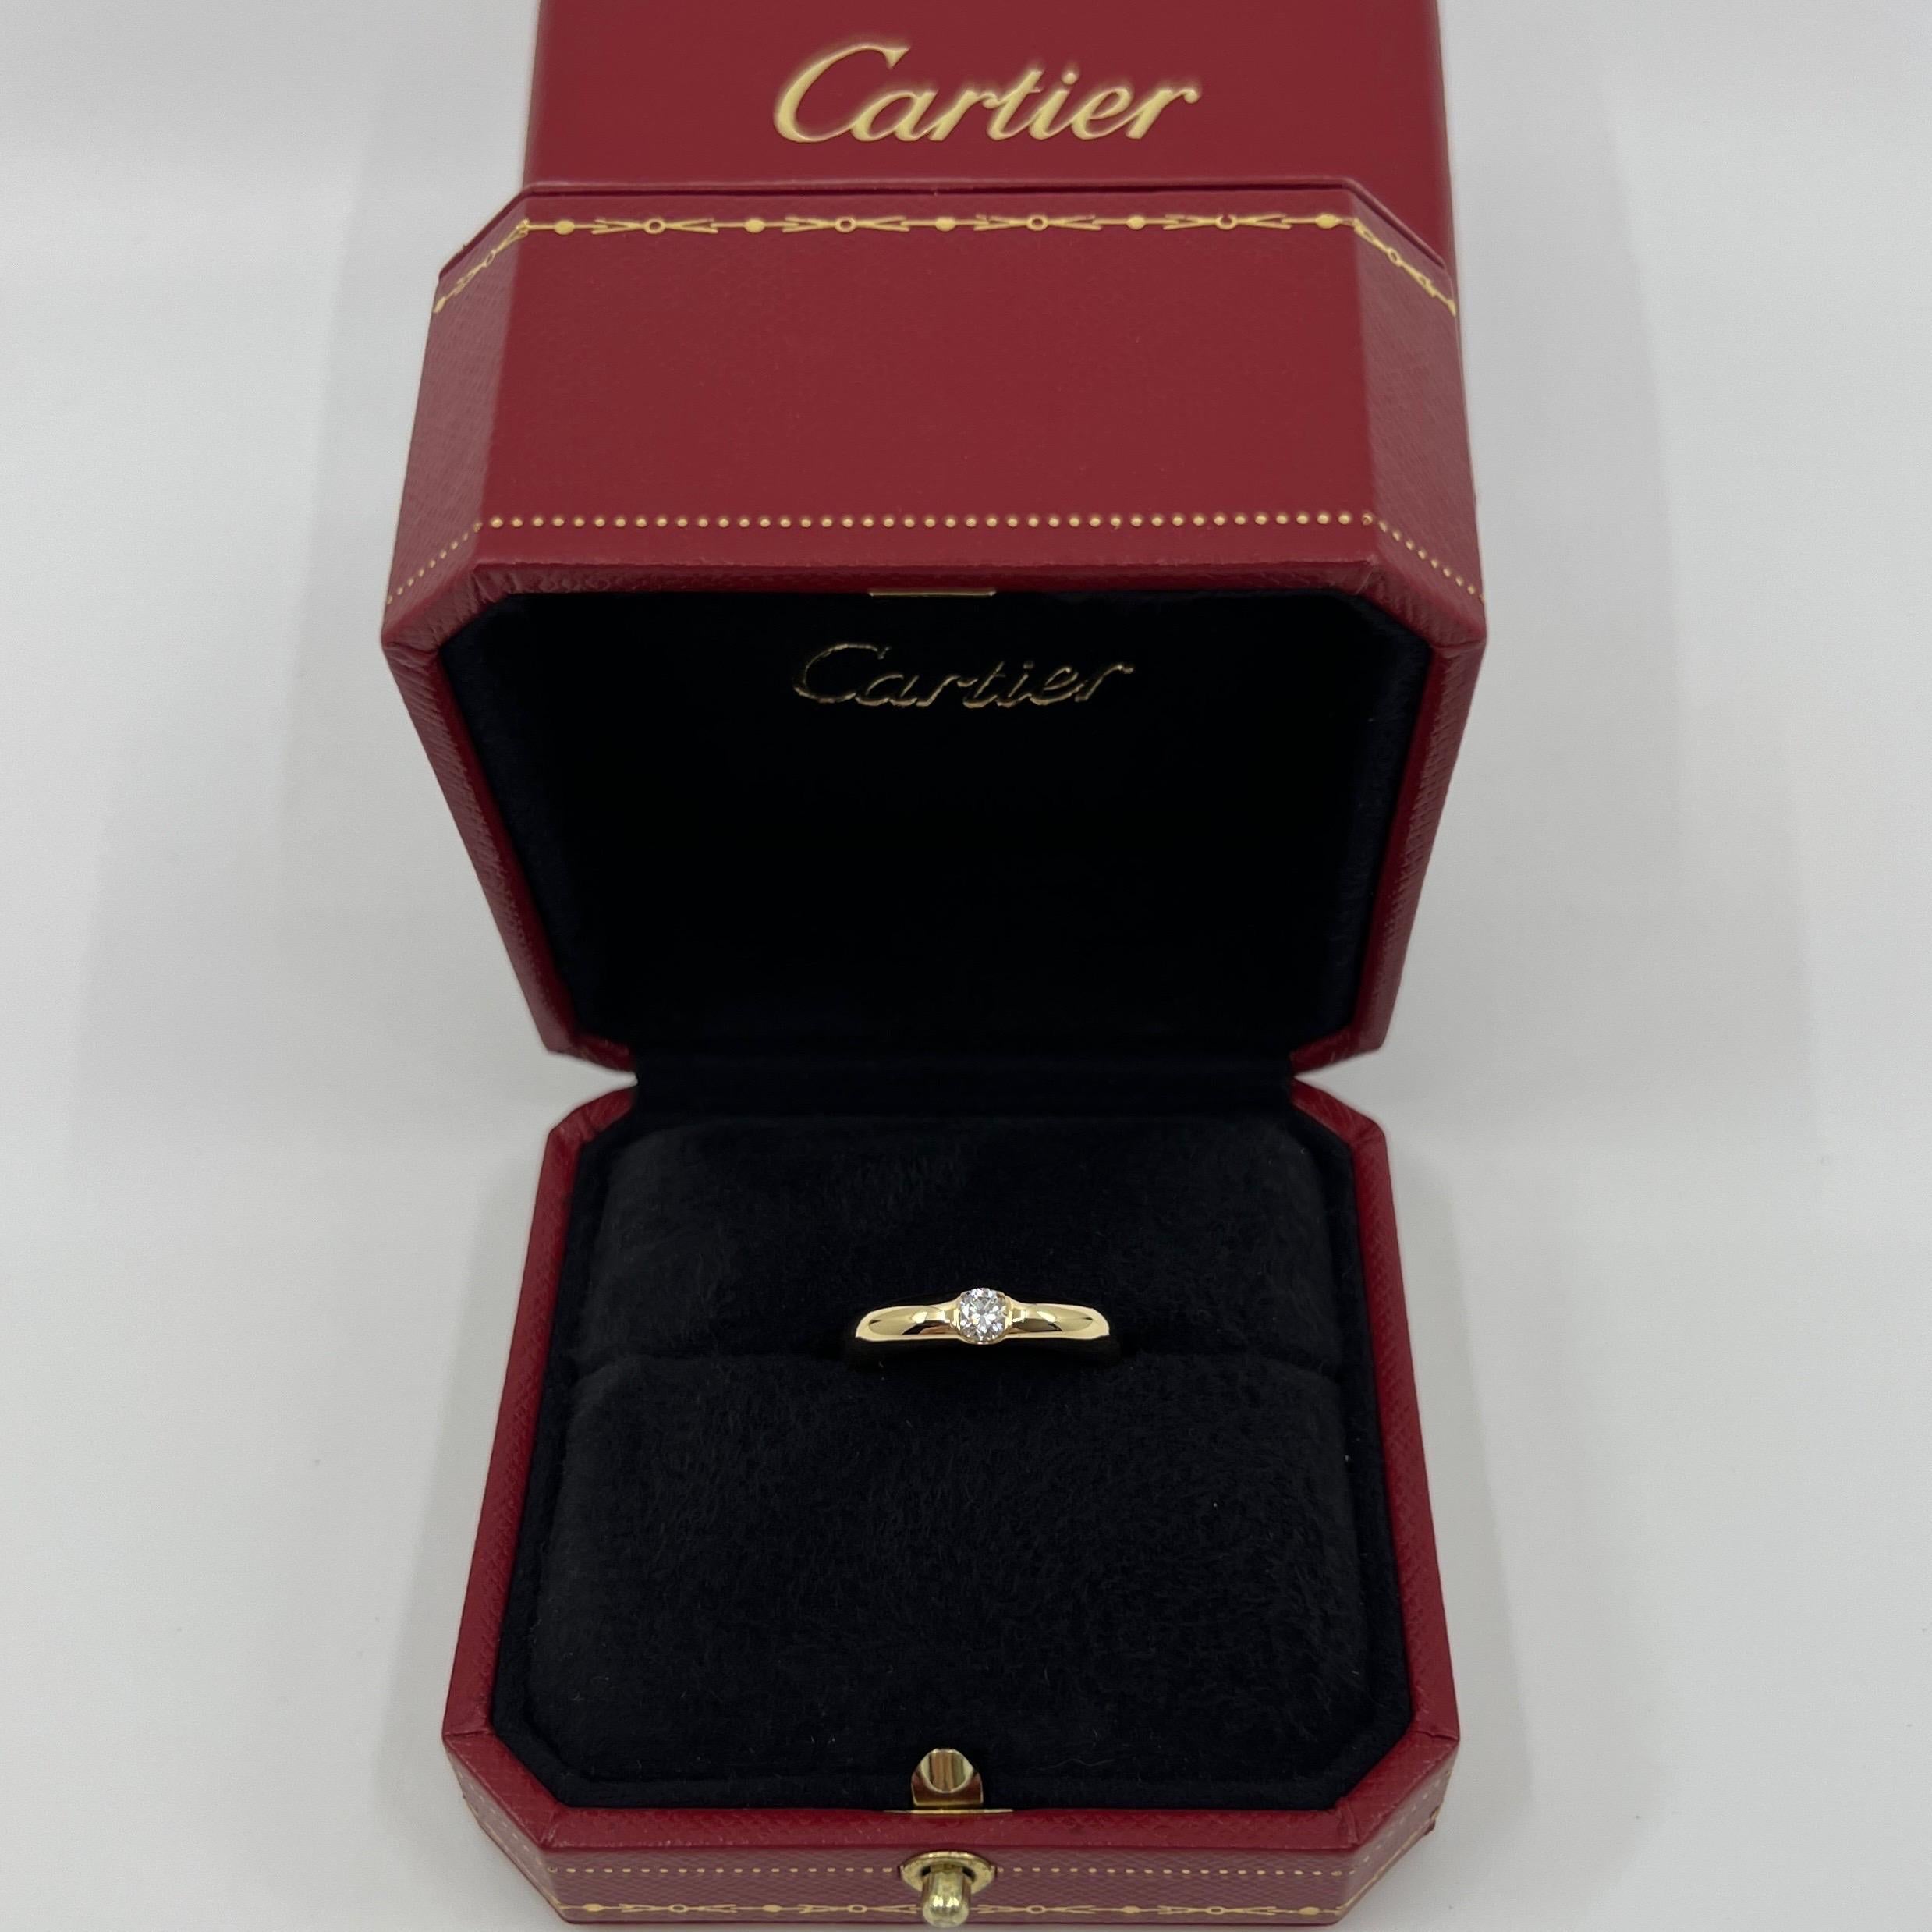 Vintage Cartier Round Brilliant Cut Natural Diamond 18k Yellow Gold Solitaire Band Ring.

Stunning yellow gold ring set with a fine 0.22ct natural round diamond. E colour VVS1 clarity with an excellent round brilliant cut.
Fine jewellery houses like